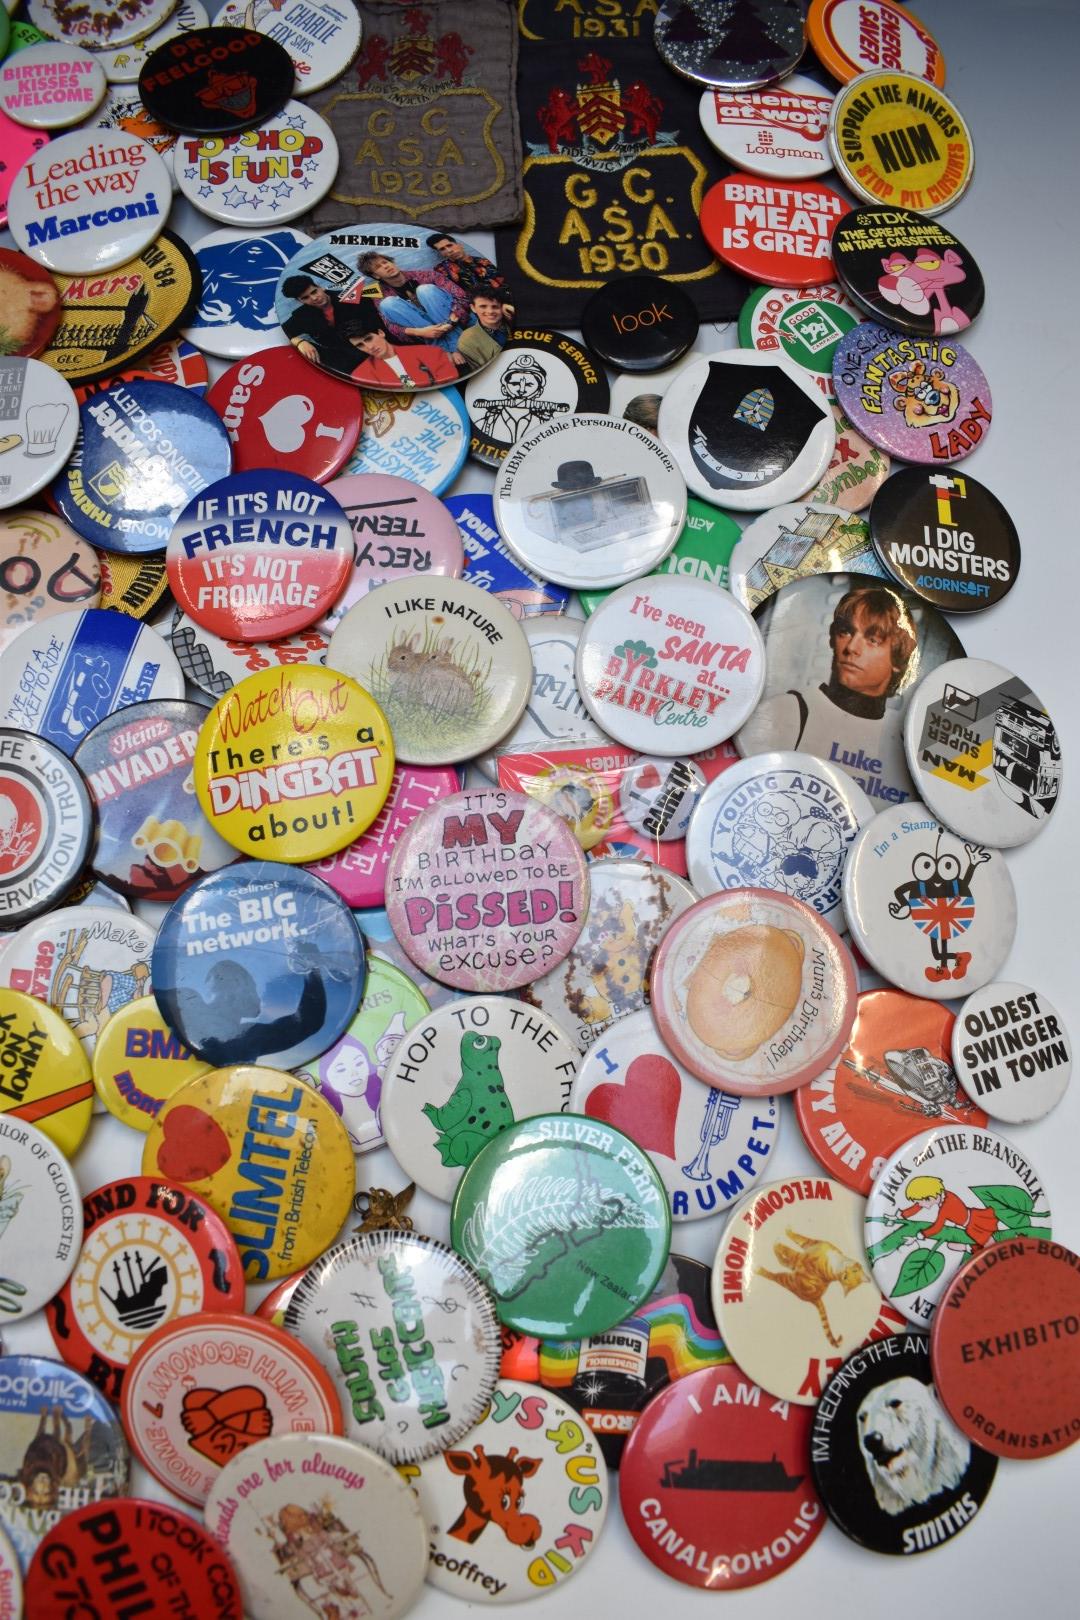 Over 1000 vintage and collectable badges including social history, advertising, humorous, slogans, - Image 6 of 9